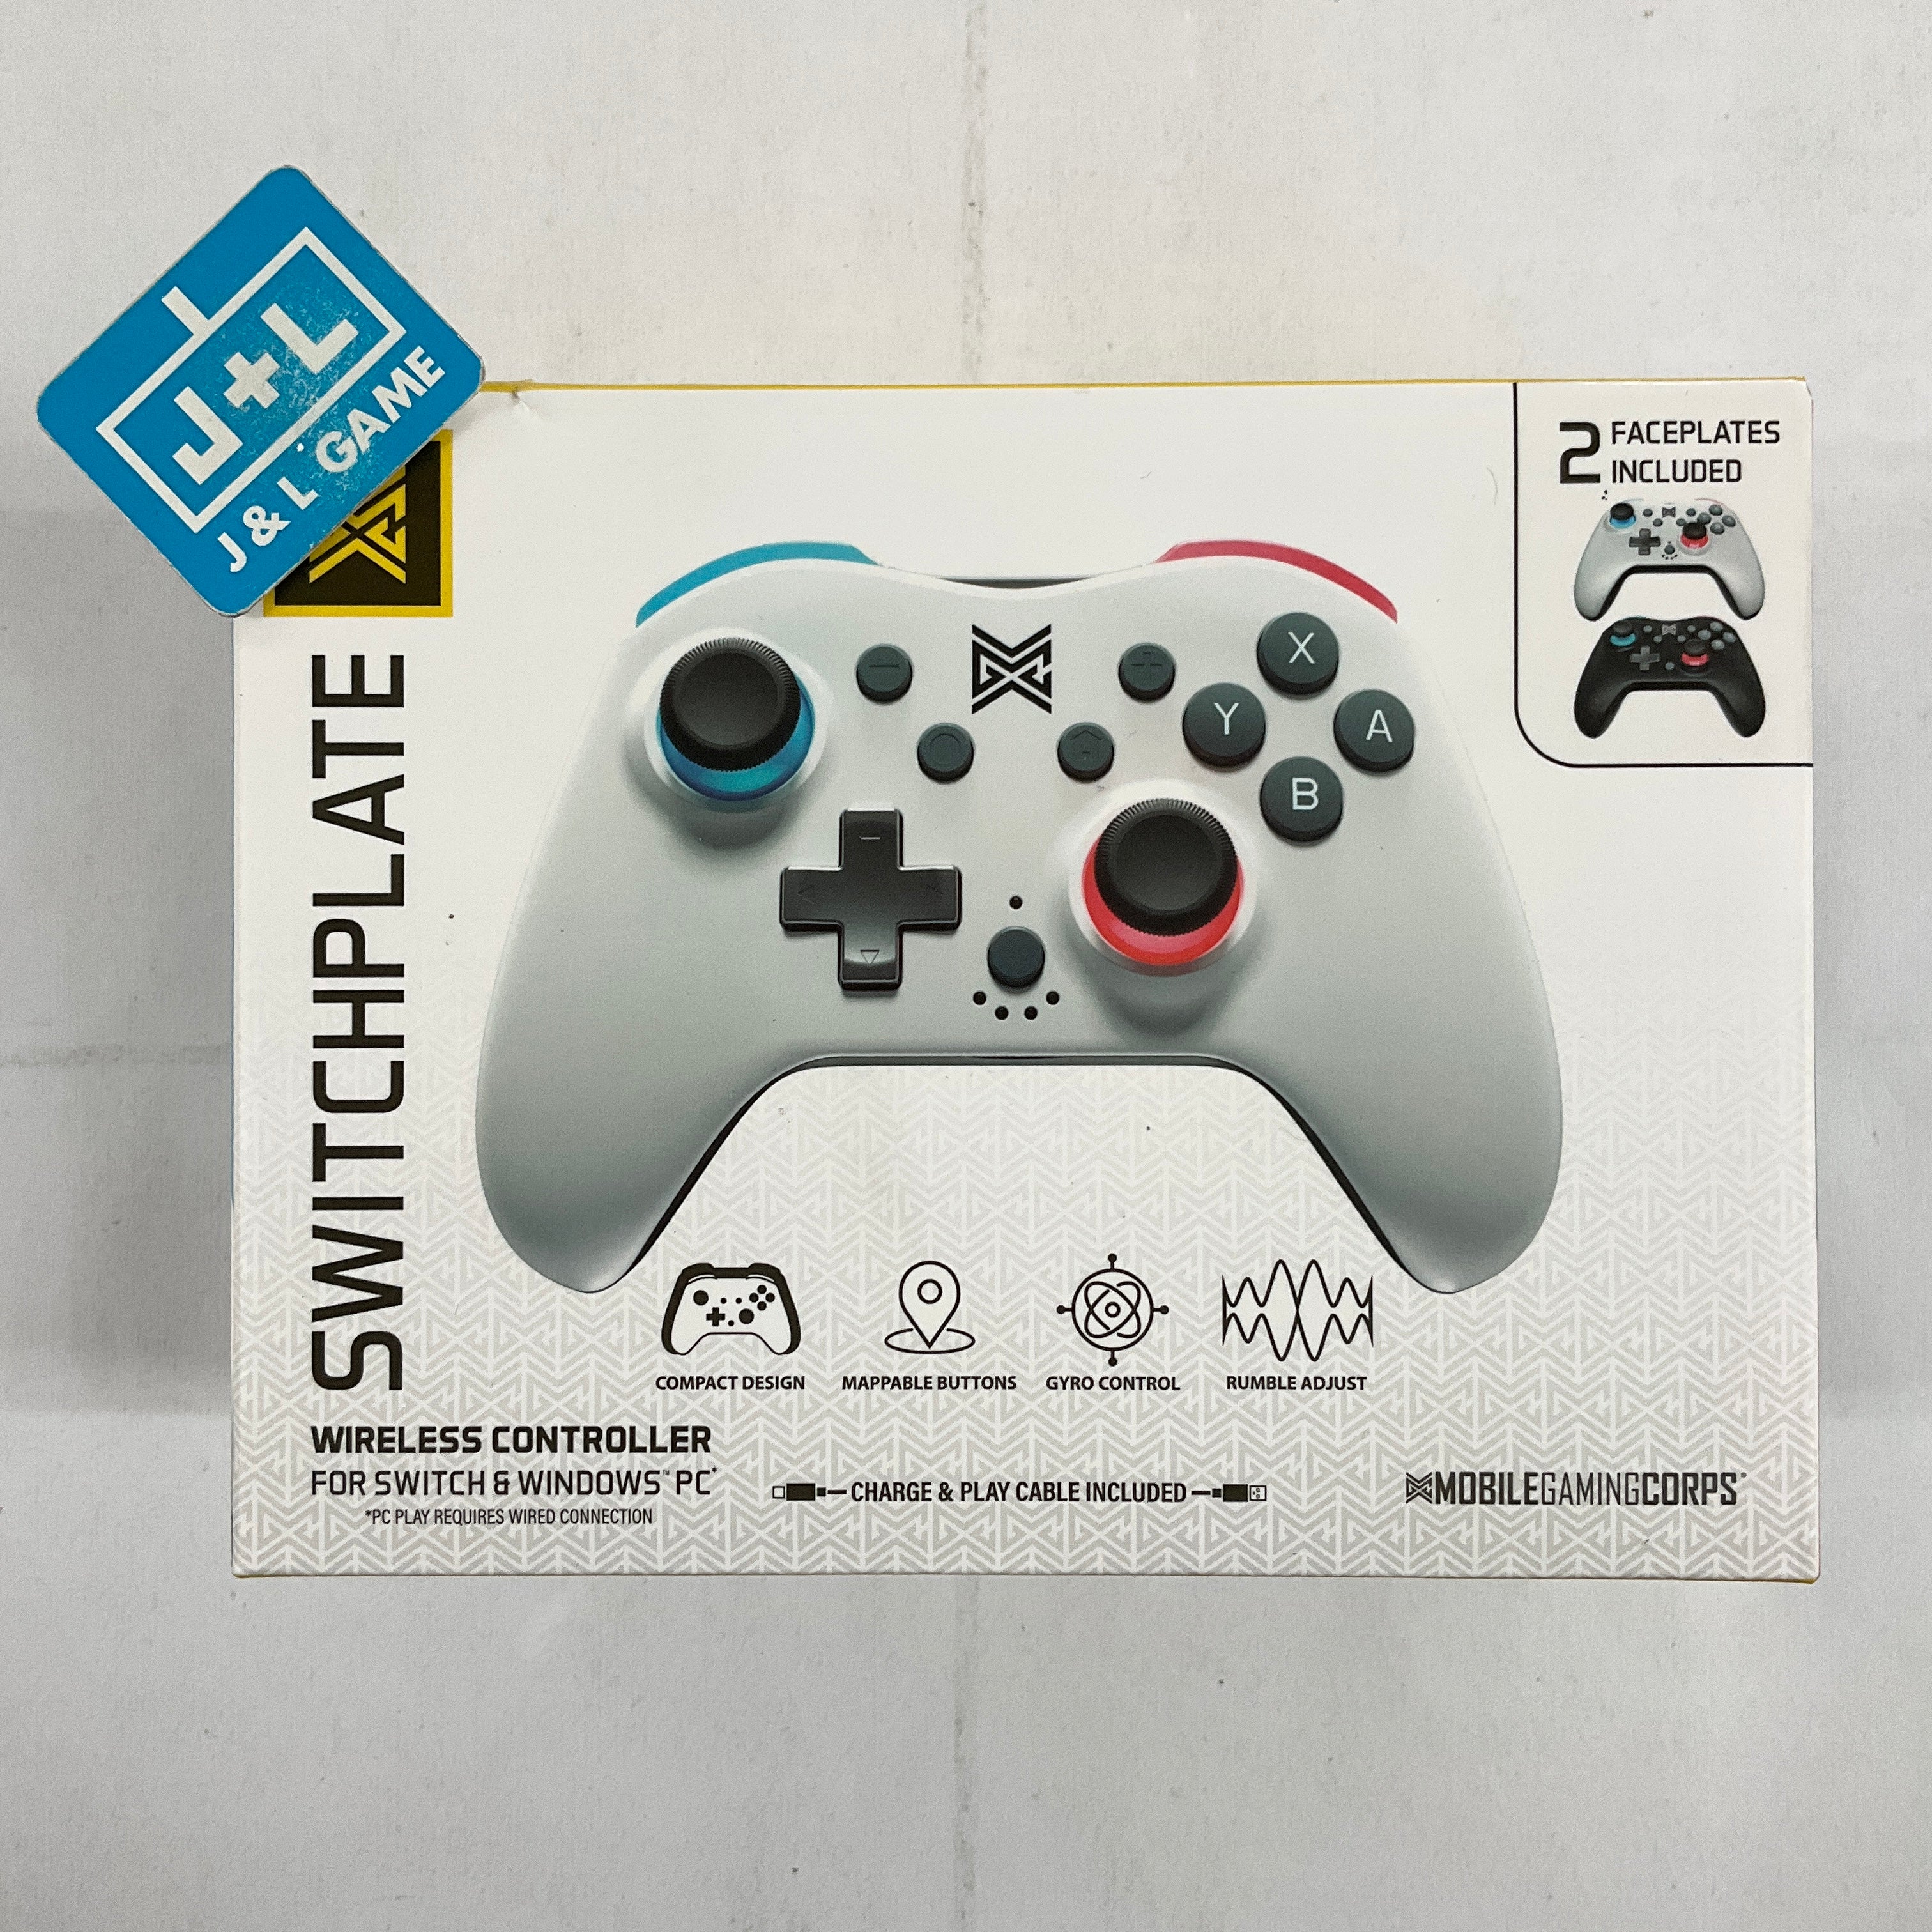 Mobile Gaming Corps Switchplate Wireless Controller (Black/White) - (NSW) Nintendo Switch Video Games MOBILEGAMINGCORPS   